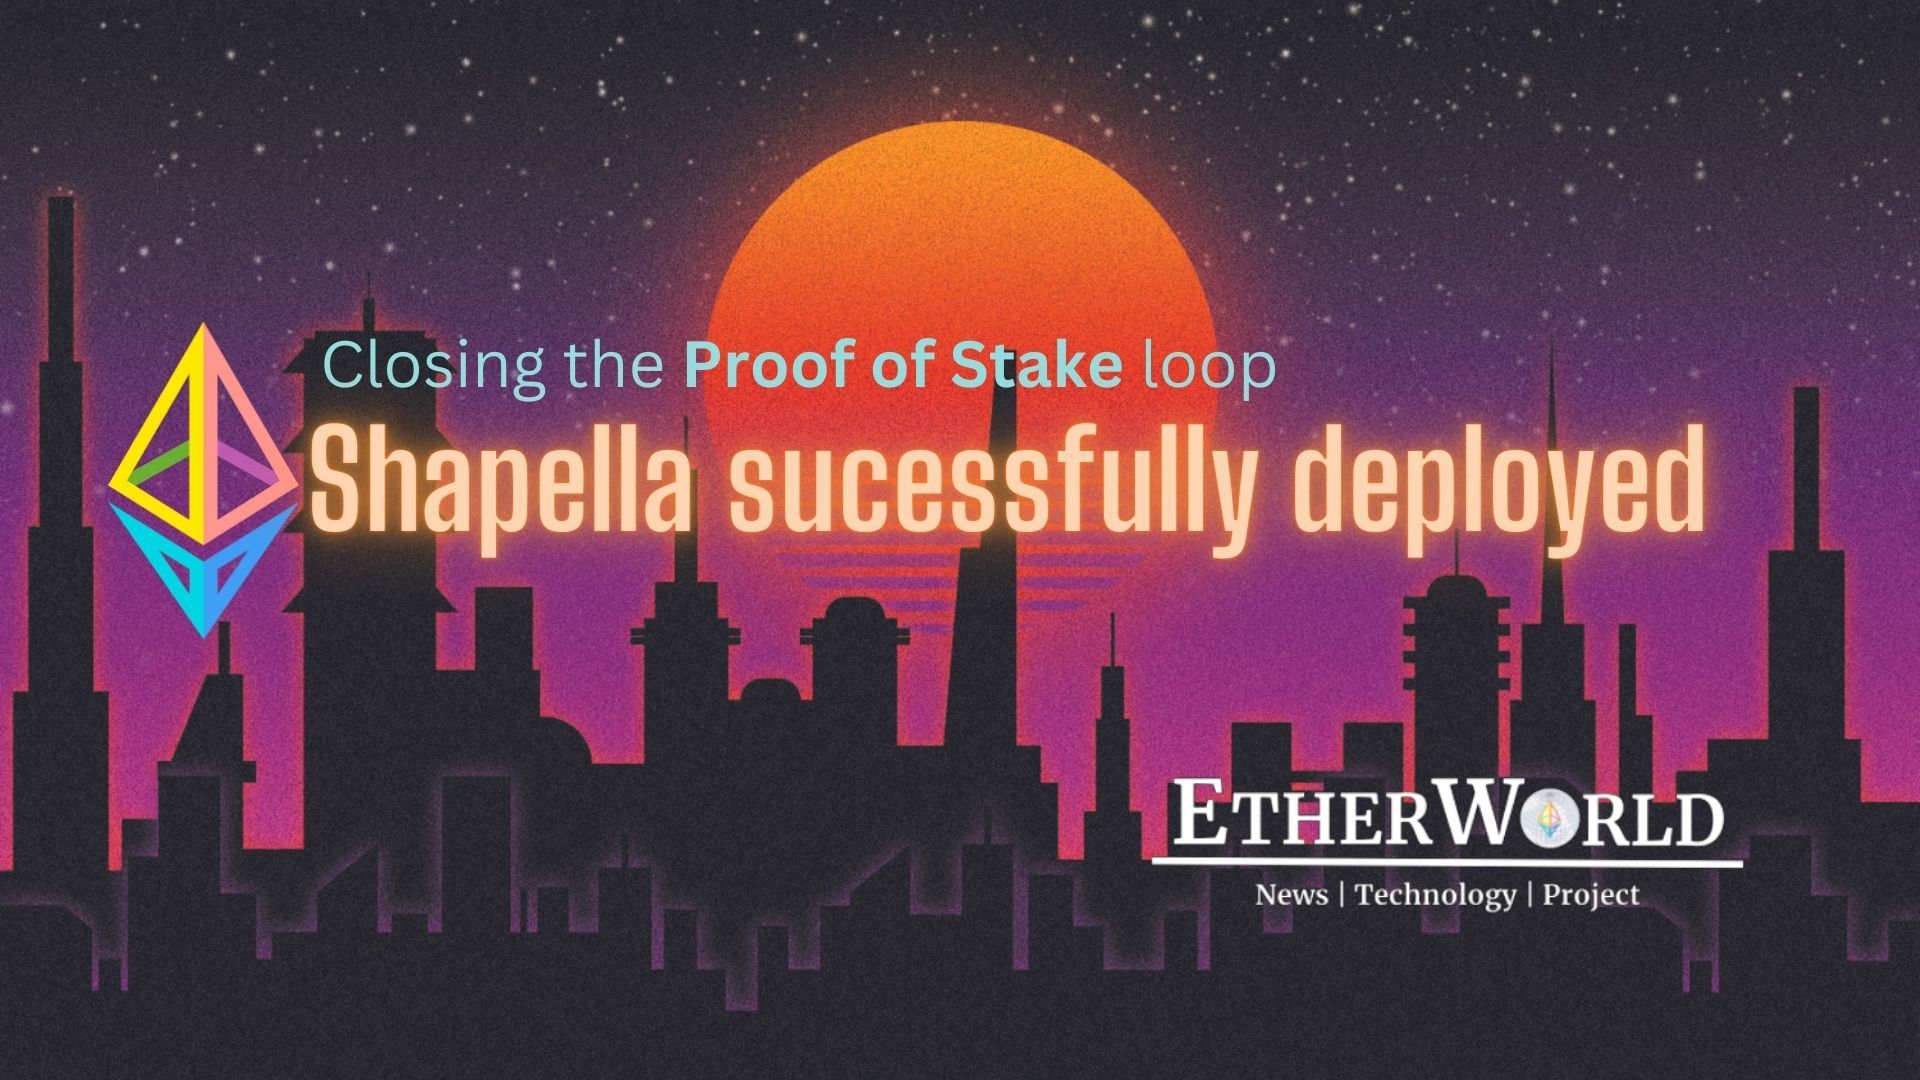 Shapella Successfully deployed, closing the PoS loop for Ethereum